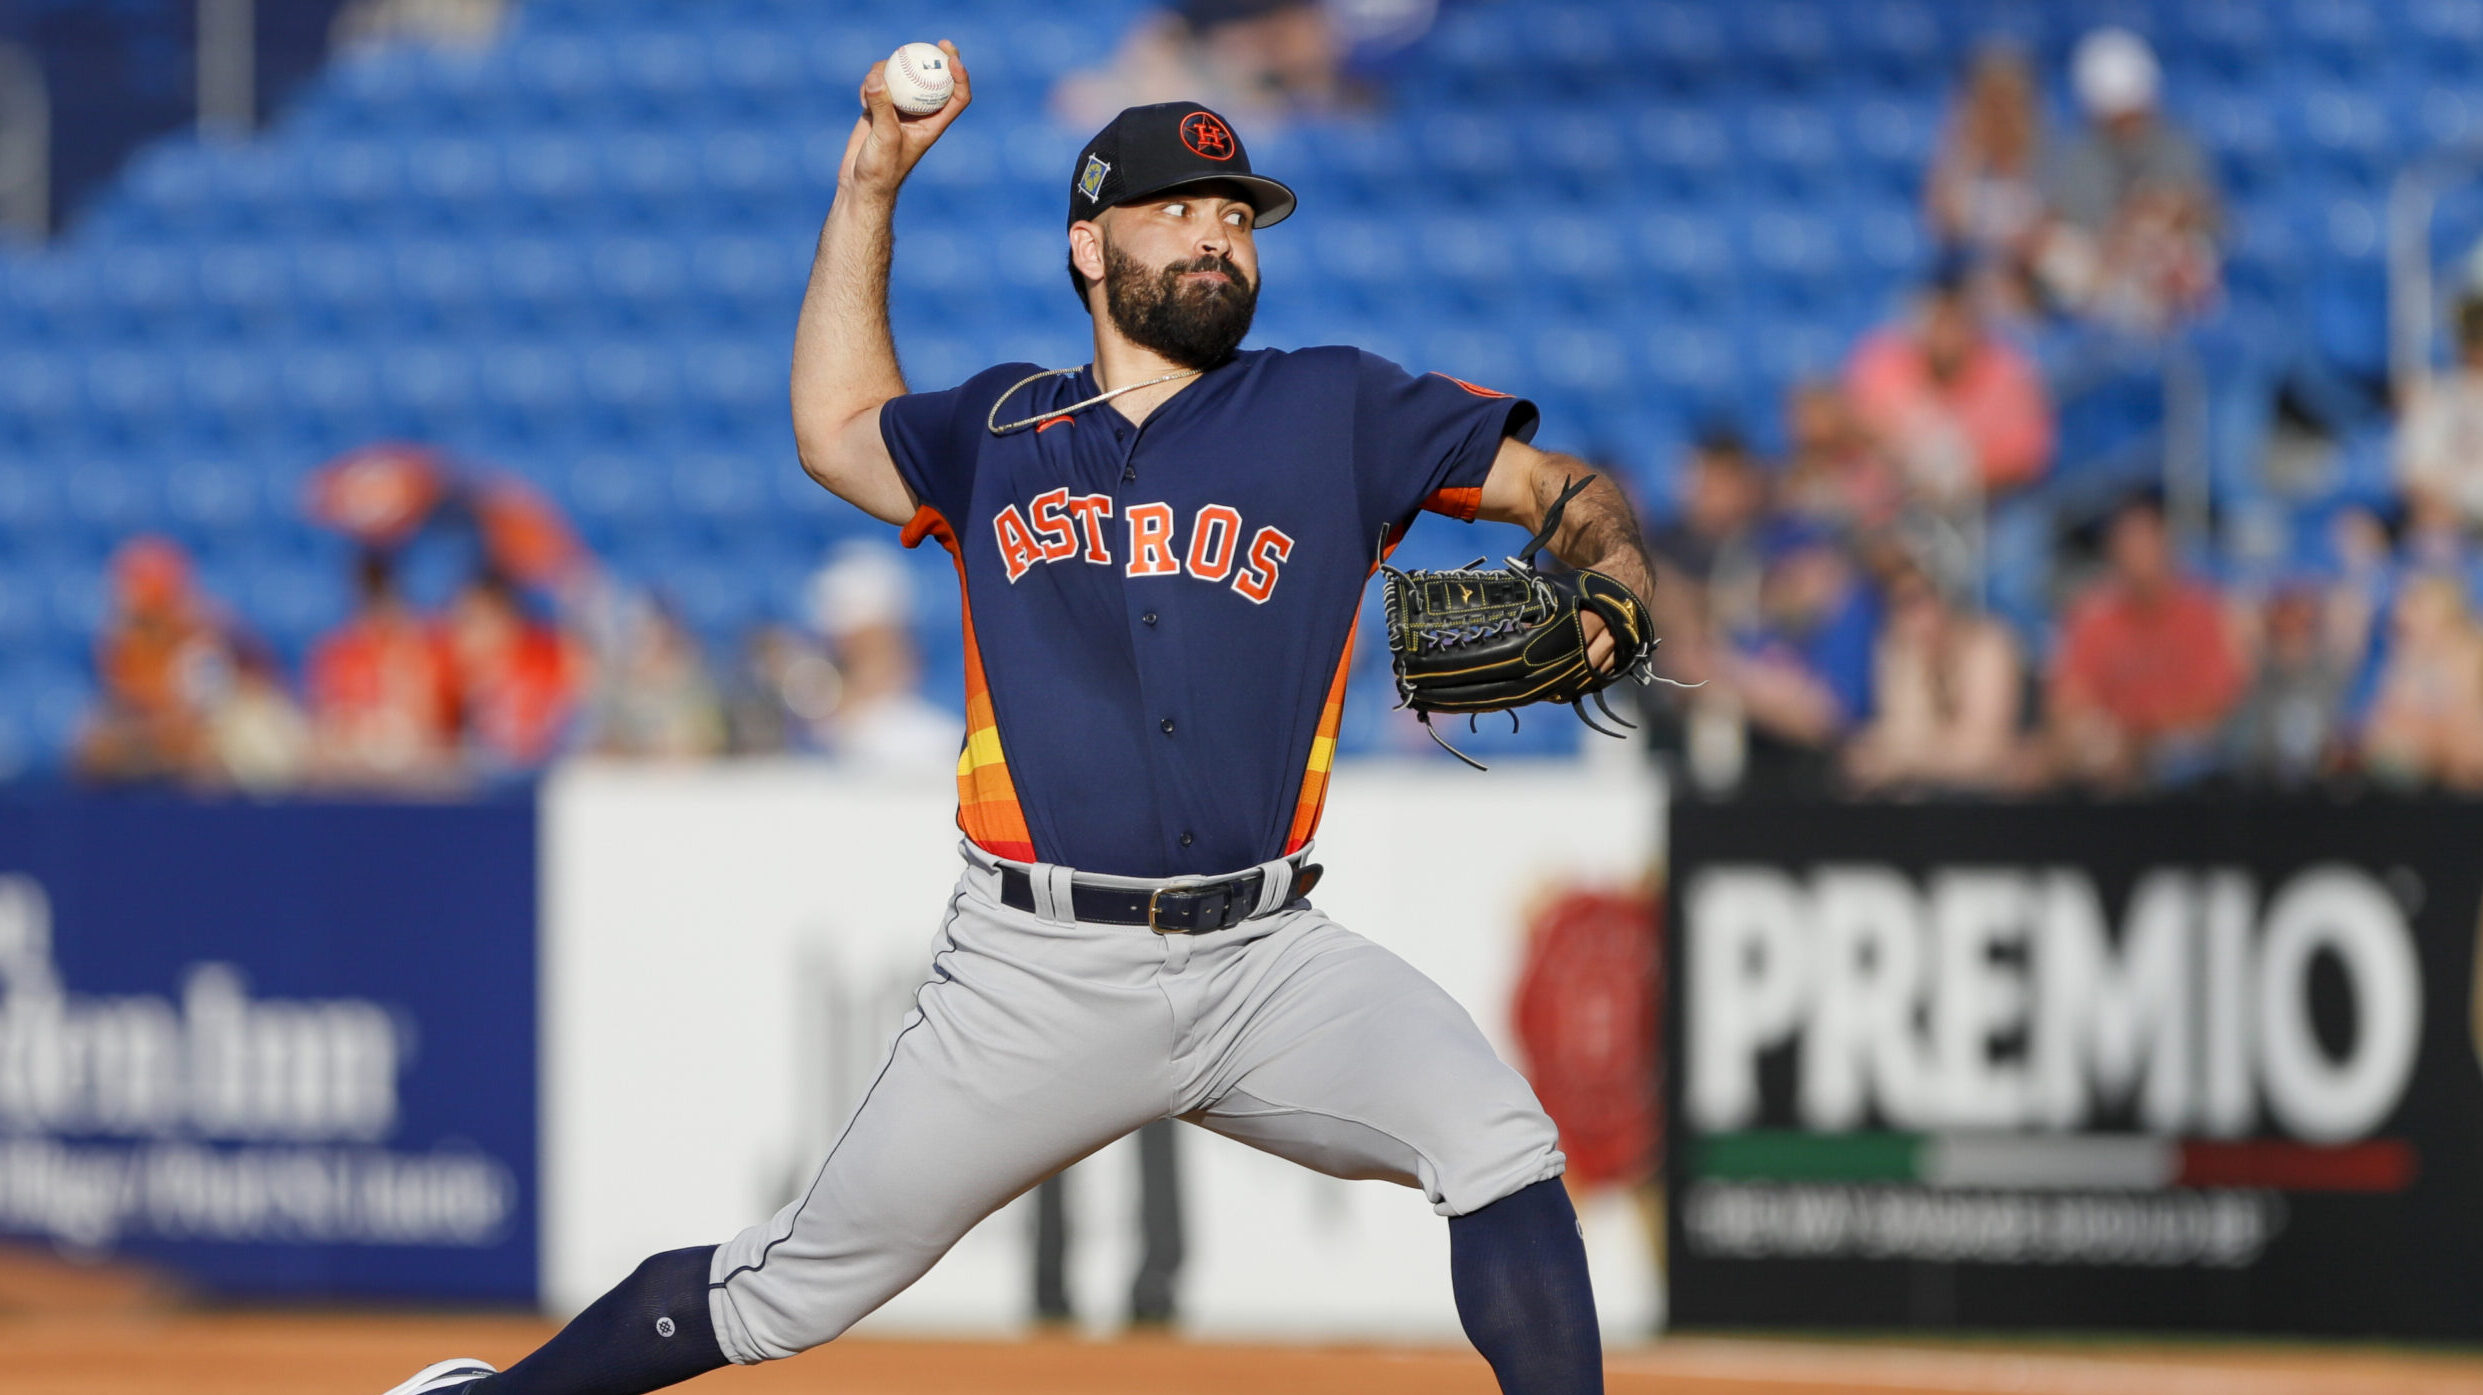 Stadium on X: The Astros are debuting their Space City uniforms